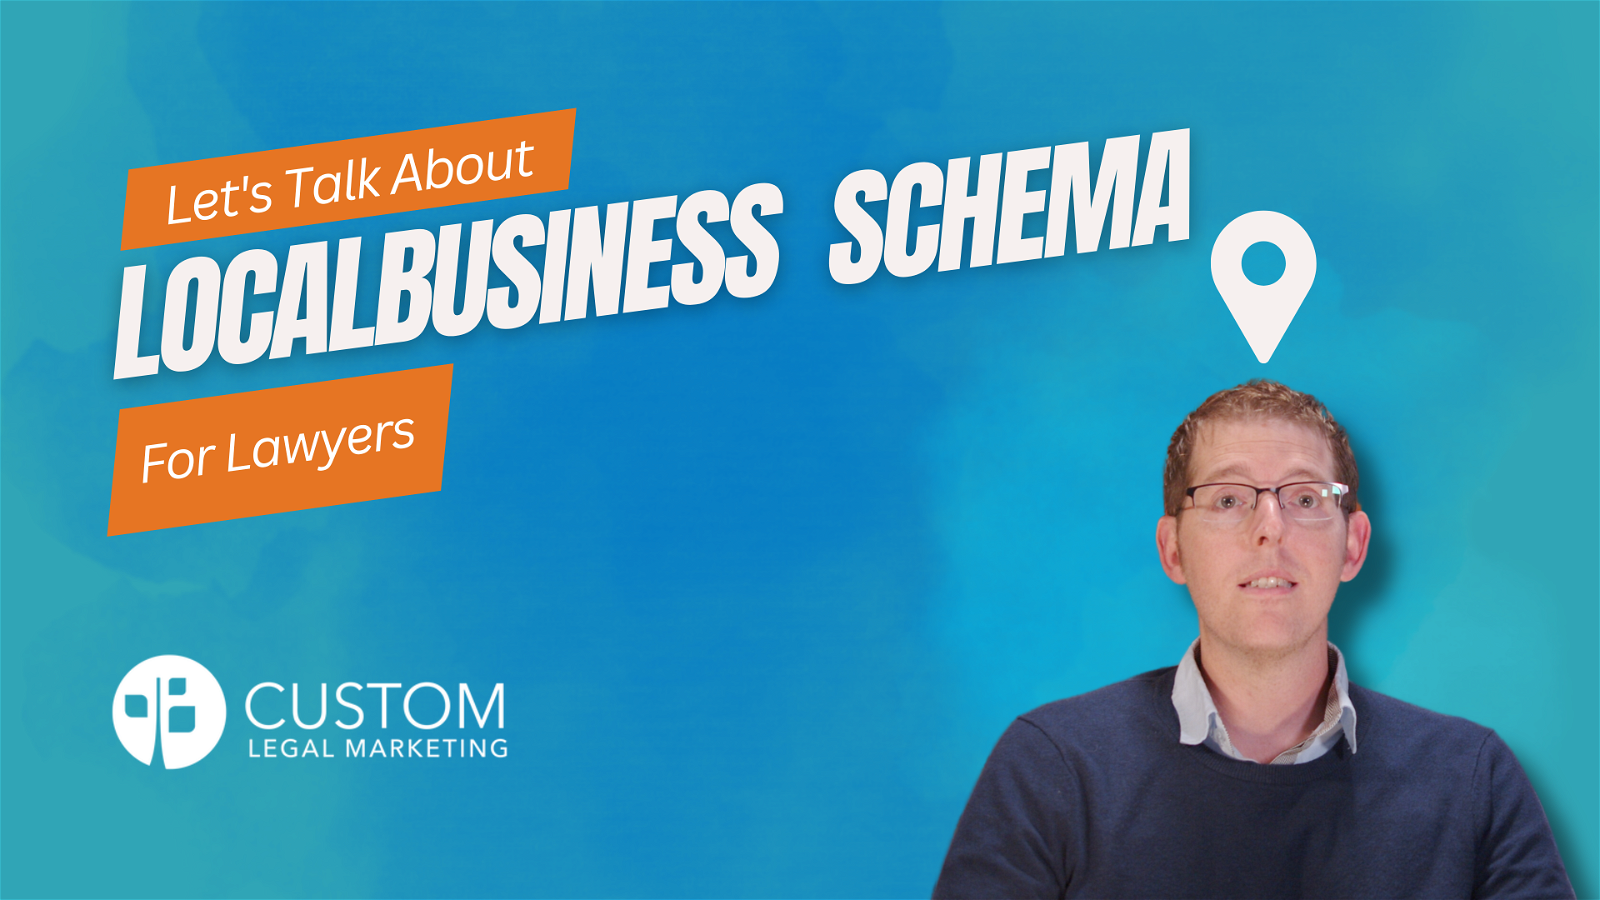 Add LocalBusiness Schema to Your Law Firm's Website in 2 Minutes